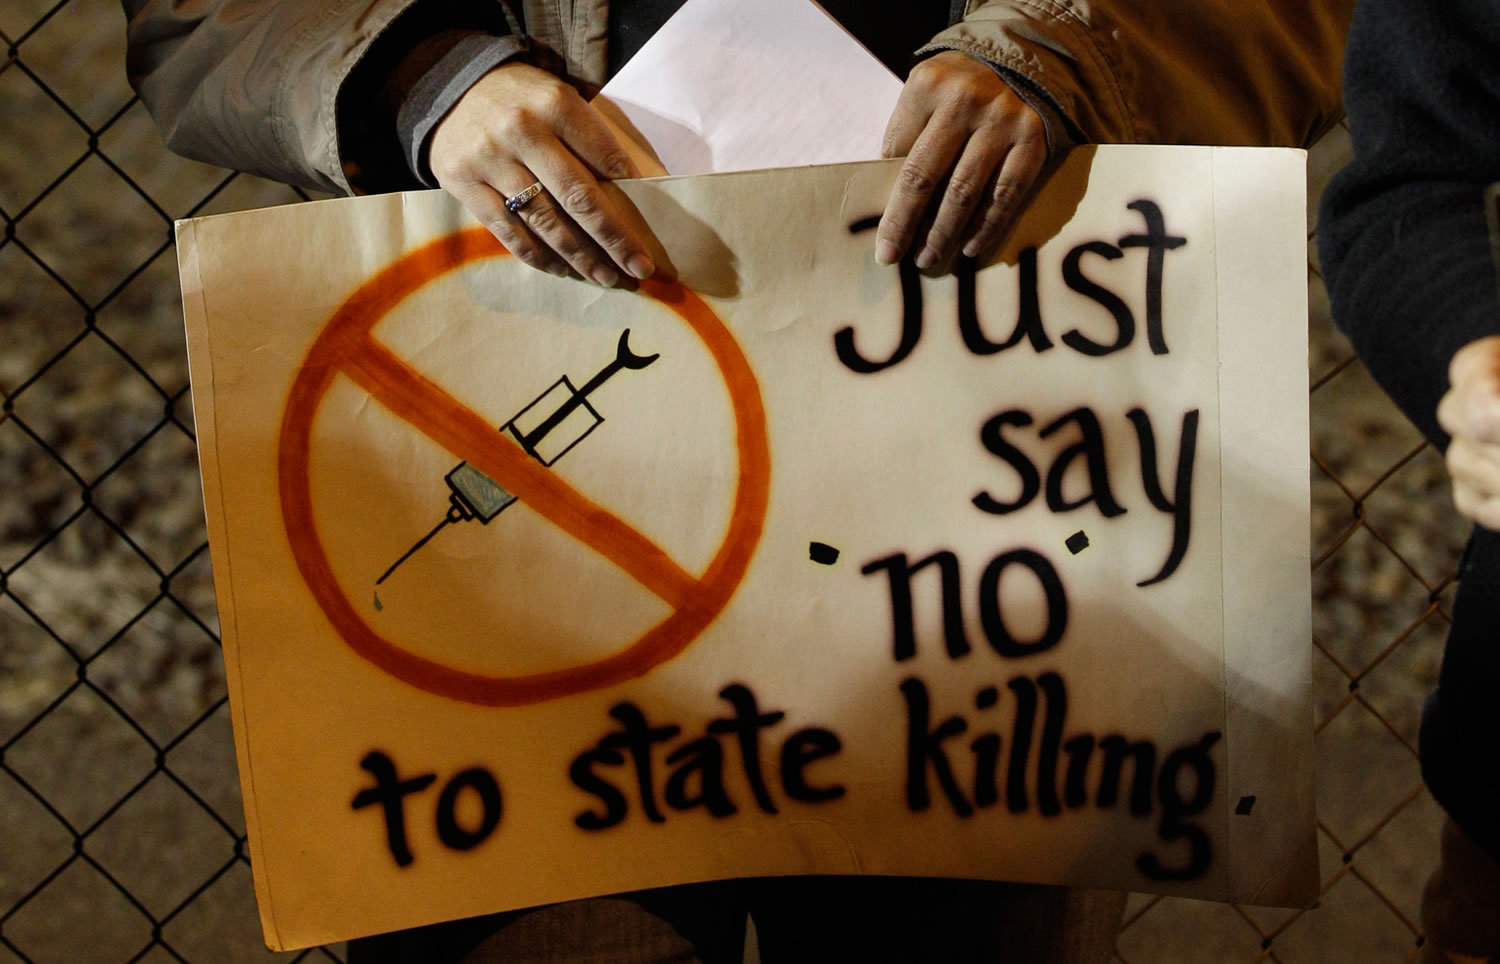 Shar Lichty holds a sign in 2010 that reads &quot;Just say 'no' to state killing,&quot; as she stands during a gathering of protestors outside the Washington State Penitentiary, in Walla Walla, during the execution of Cal Coburn Brown for a 1991 murder. Gov.